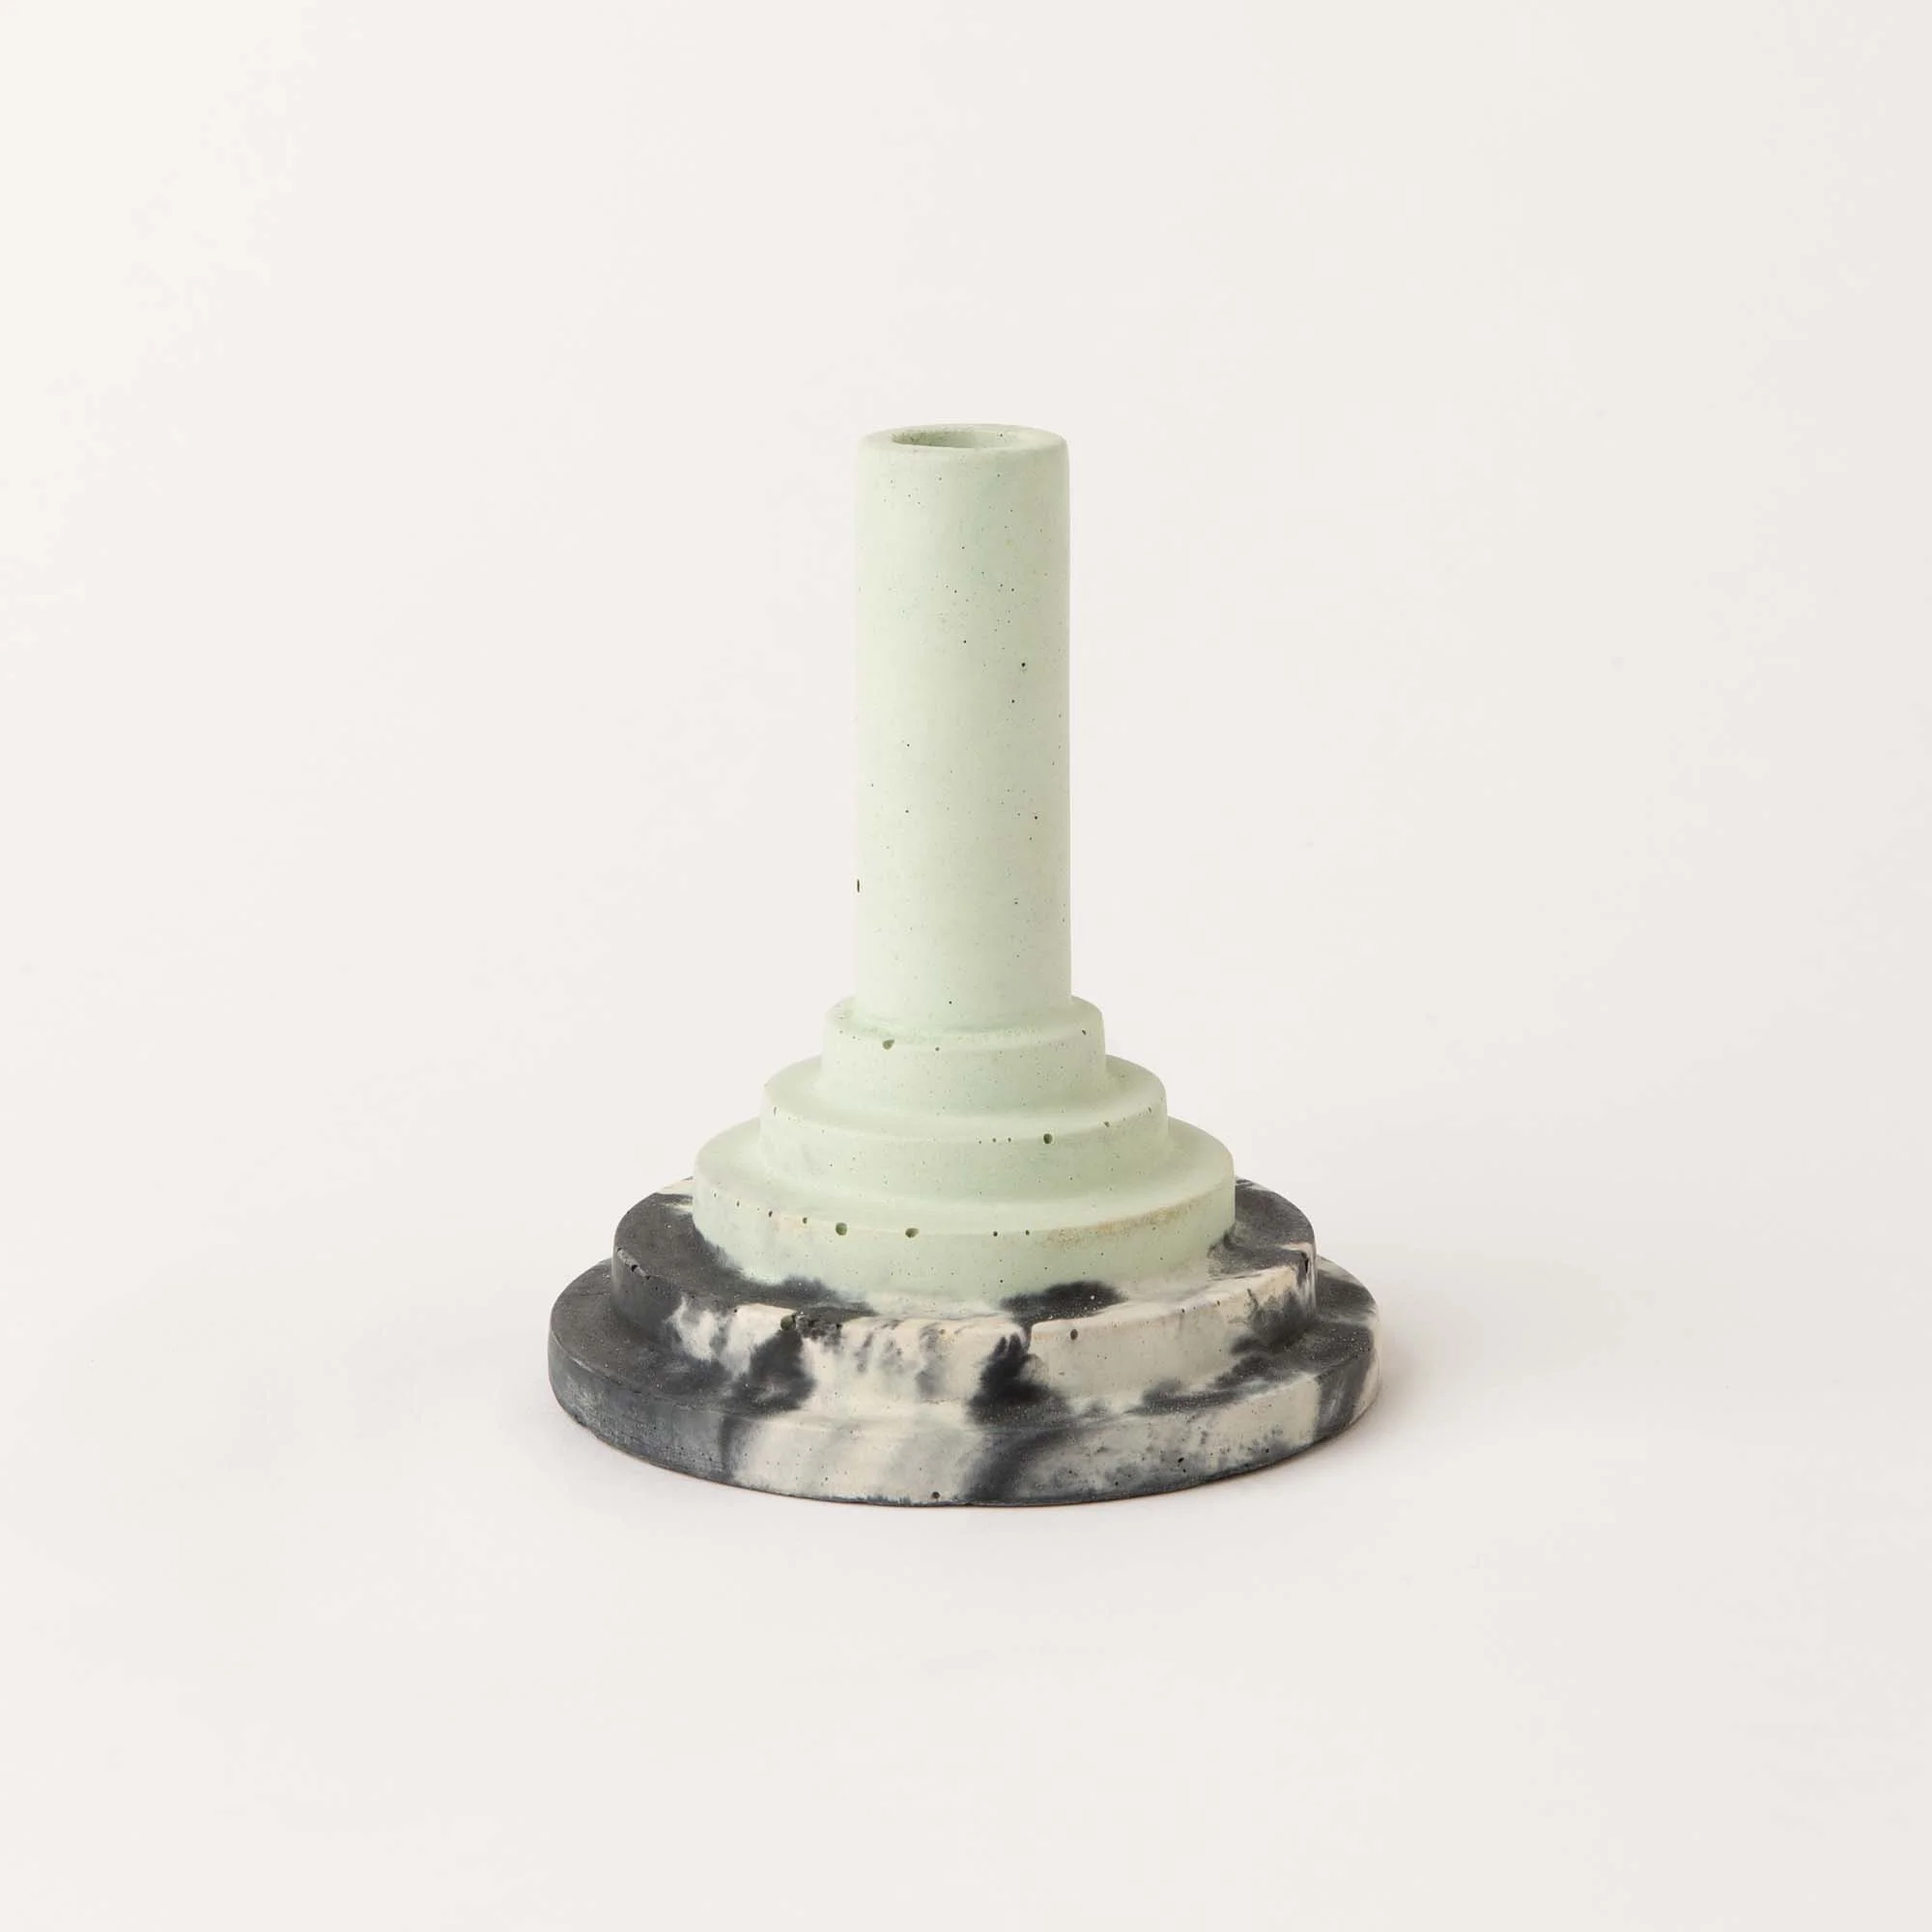 Smith & Goat Disco Stick Concrete Candle Holder - Mint, Charcoal & White Image 1